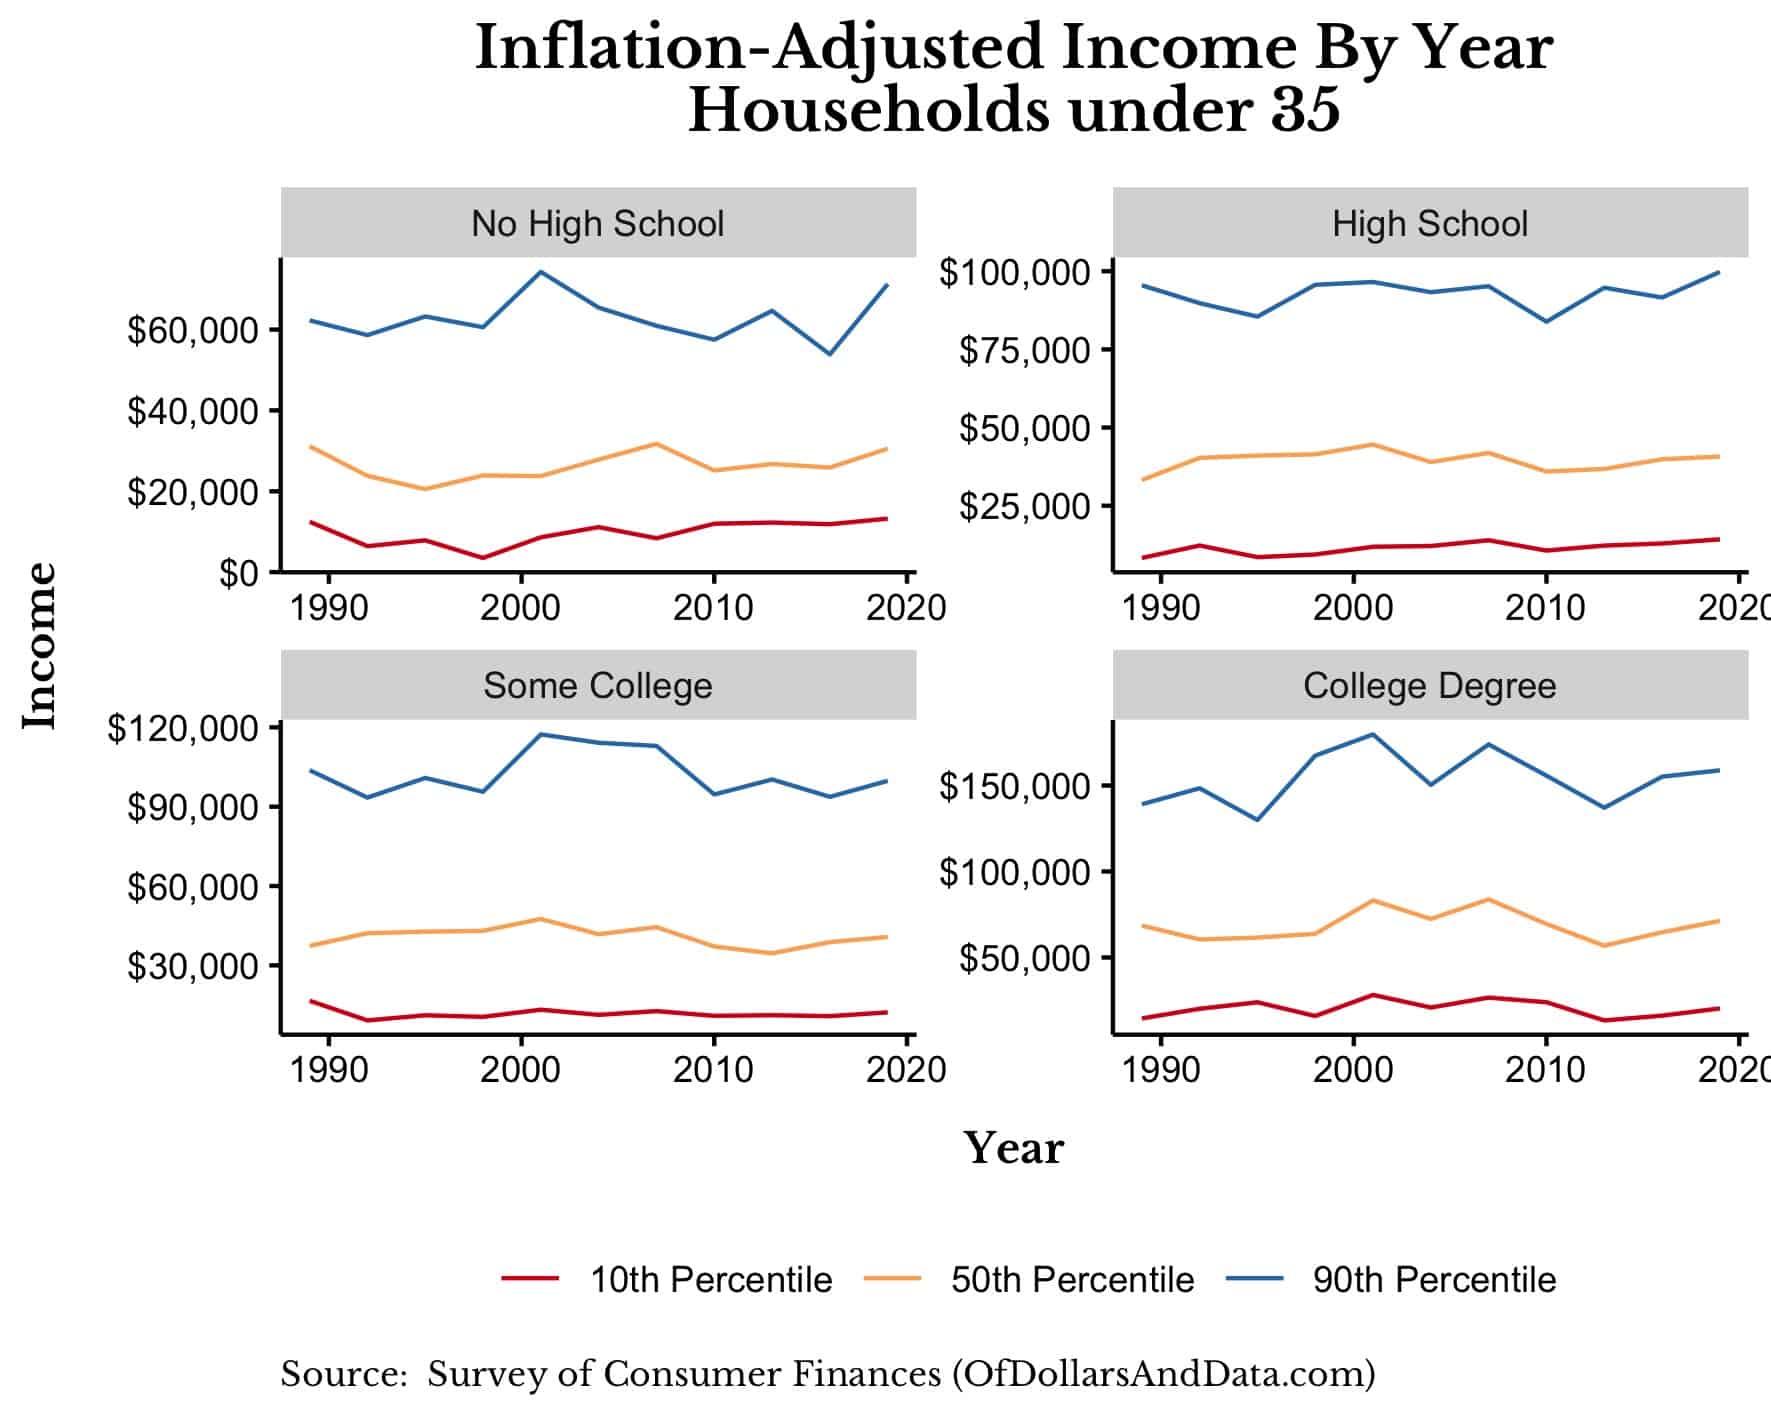 Inflation-adjusted income by year for households under 35 for the 10th, 50th, and 90th percentiles broken out by education level